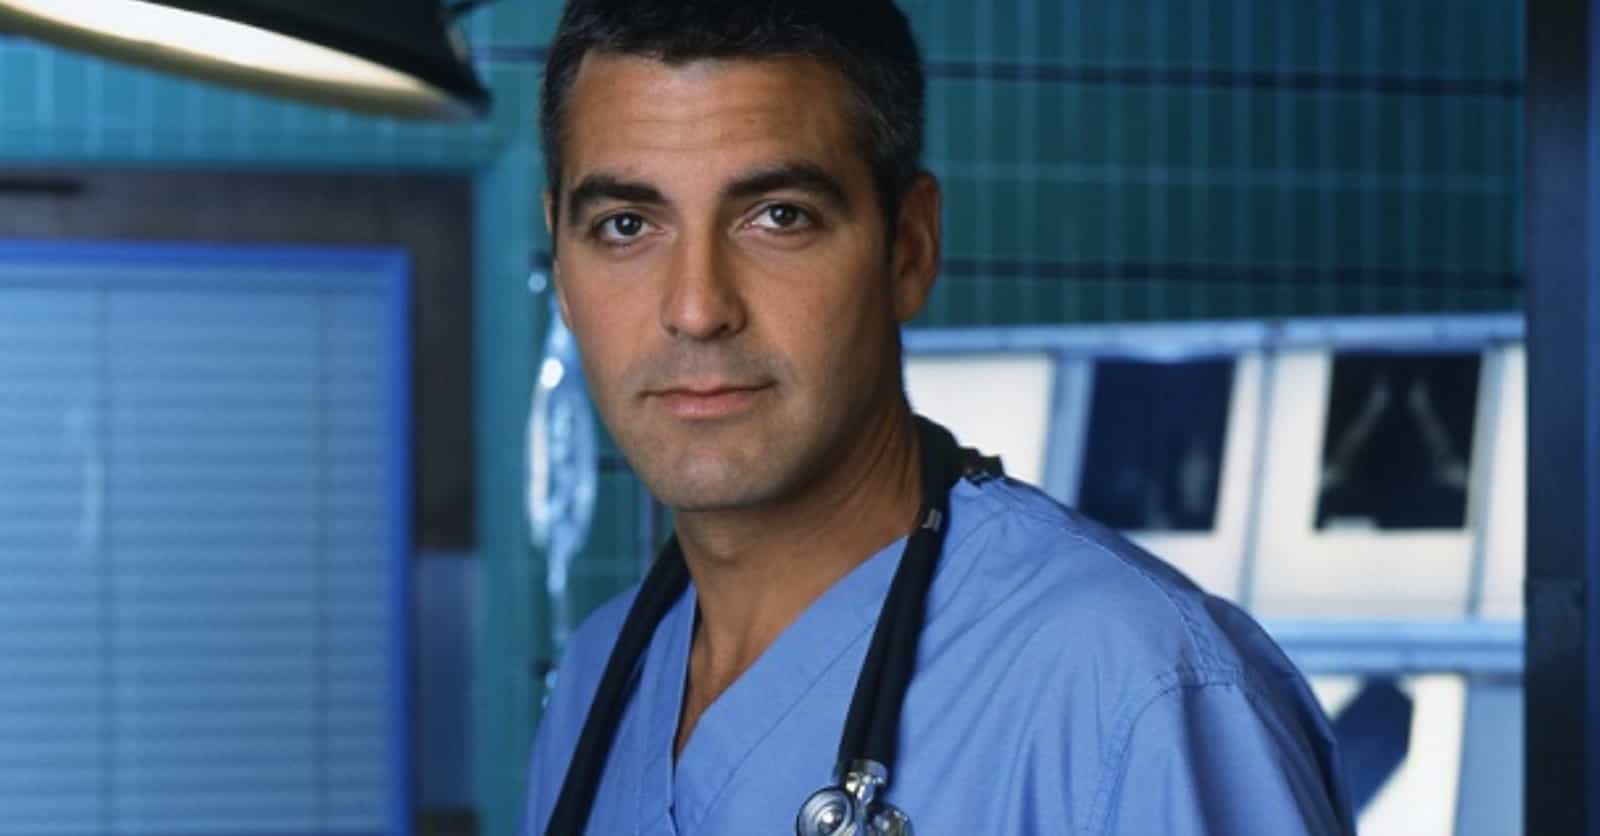 Fictional Doctors With Suspiciously Superhuman Healing Skills